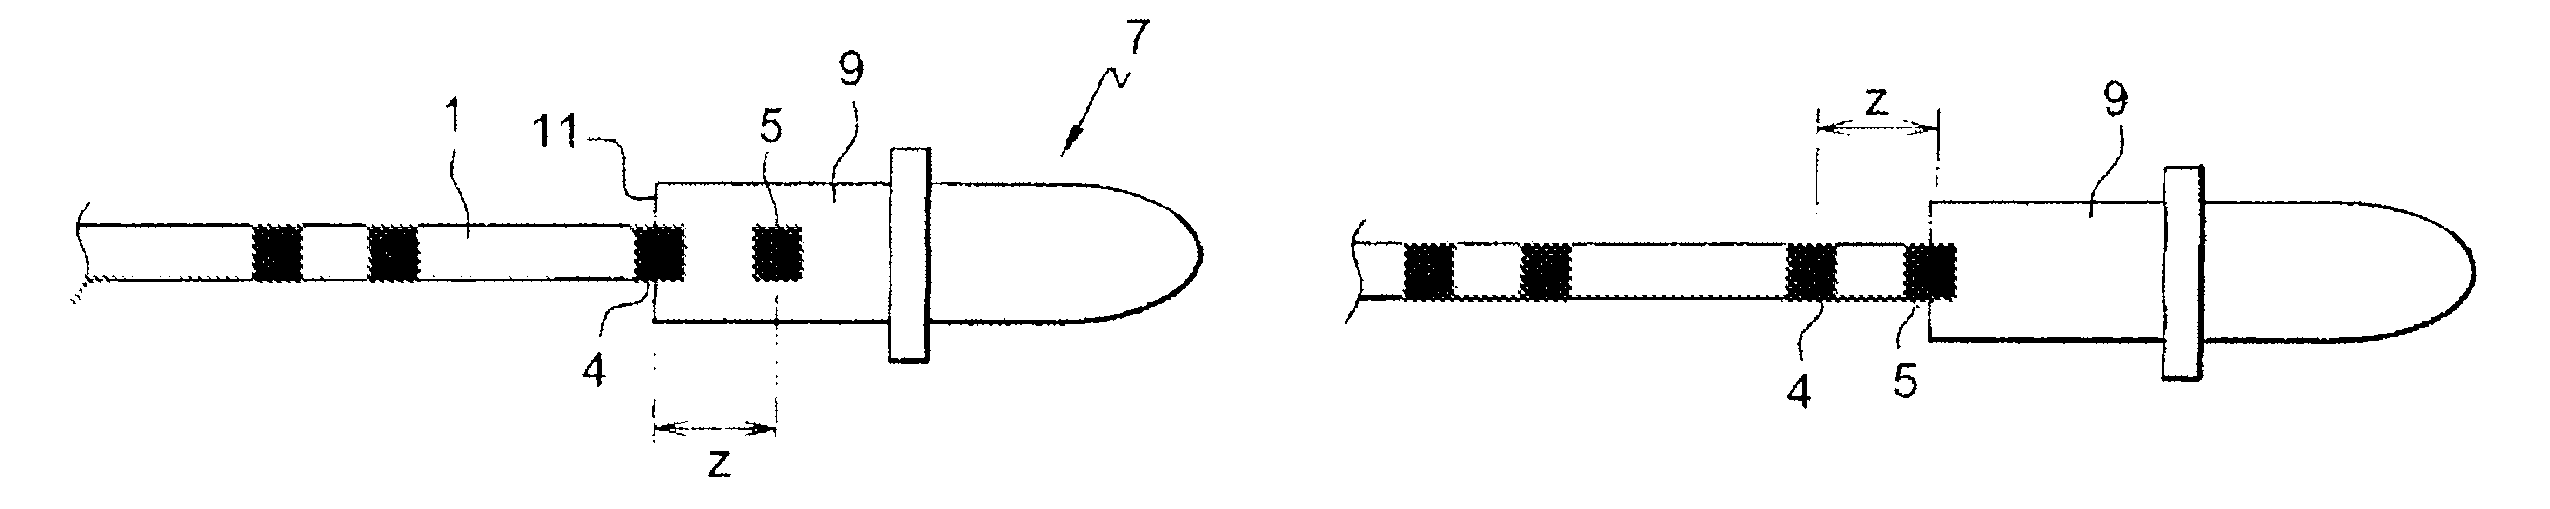 Electrical cable provided with external marking and method of crimping the barrel of a contact onto an electrical cable provided with external marking